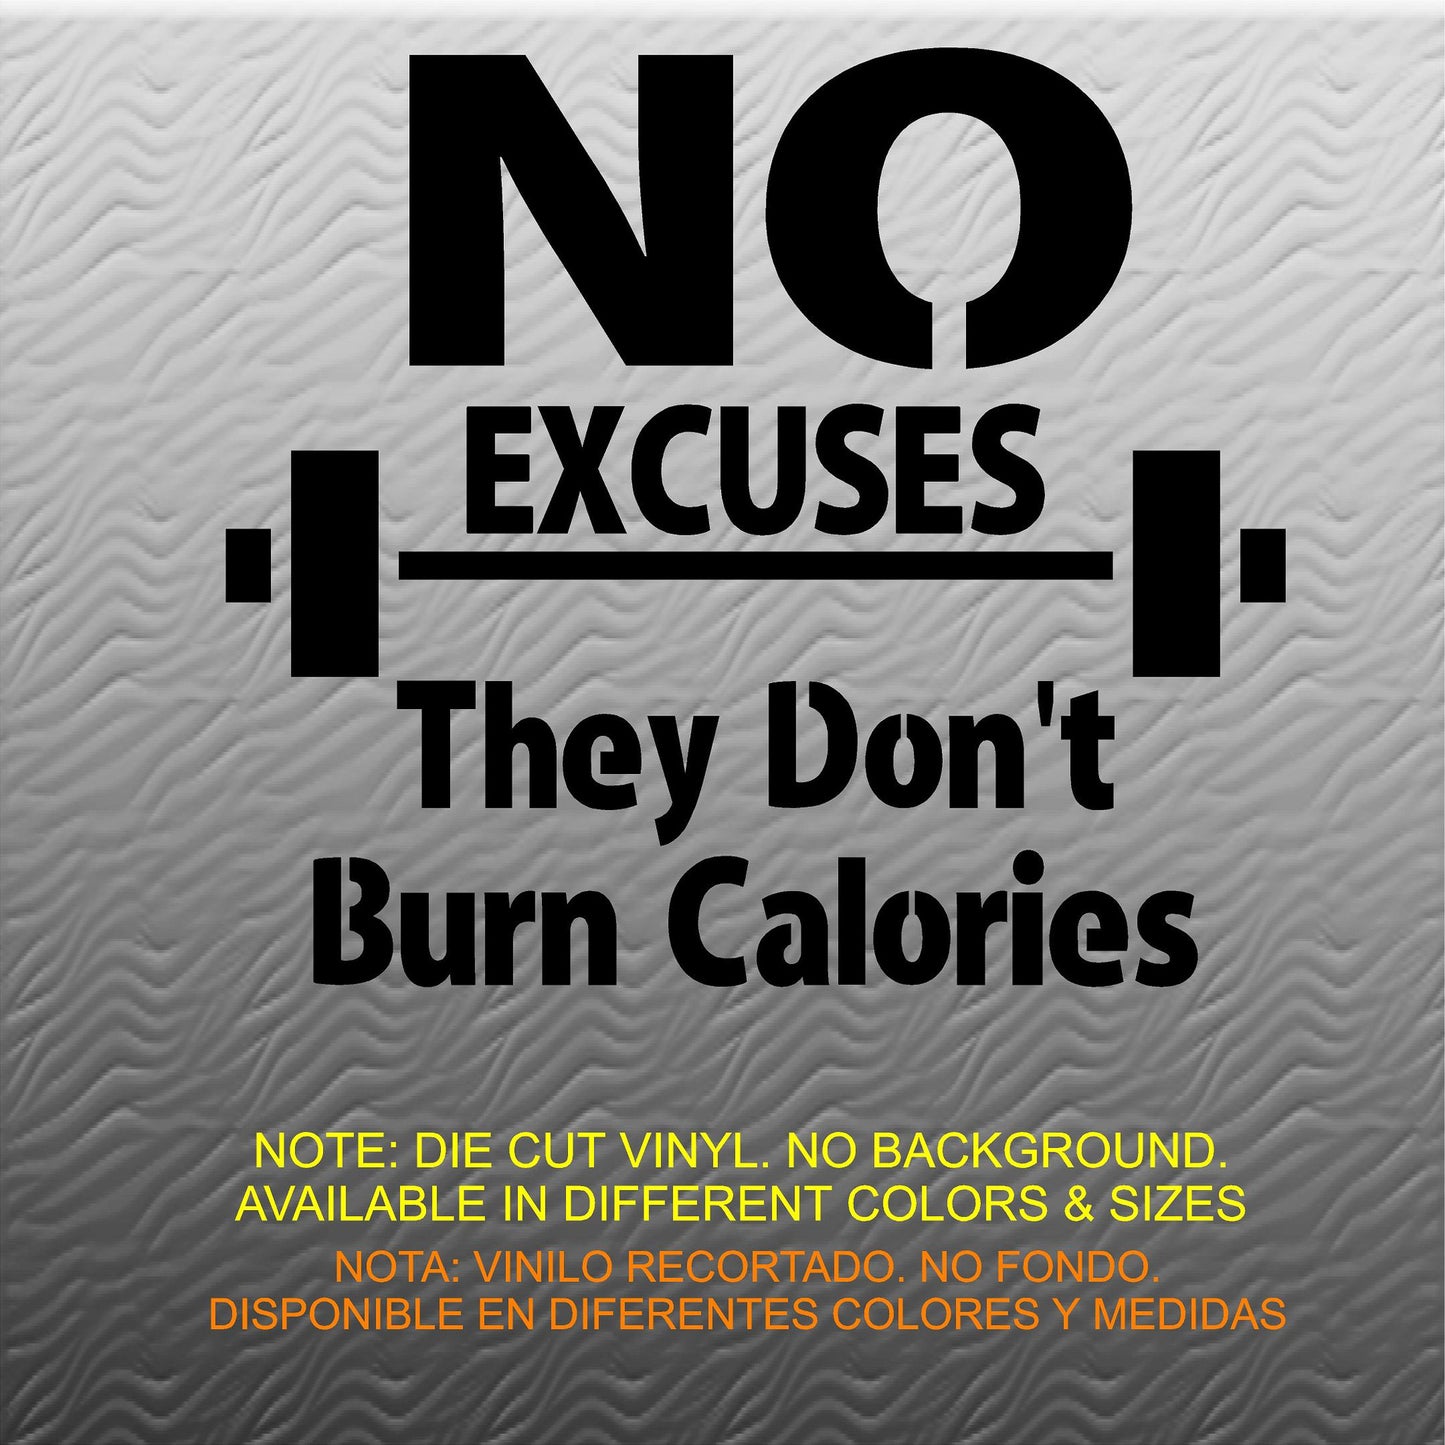 Stickers. Vinyl Wall Decal. Fitness. Gym. Exercise:  No Excuses They Don't Burn Calories.